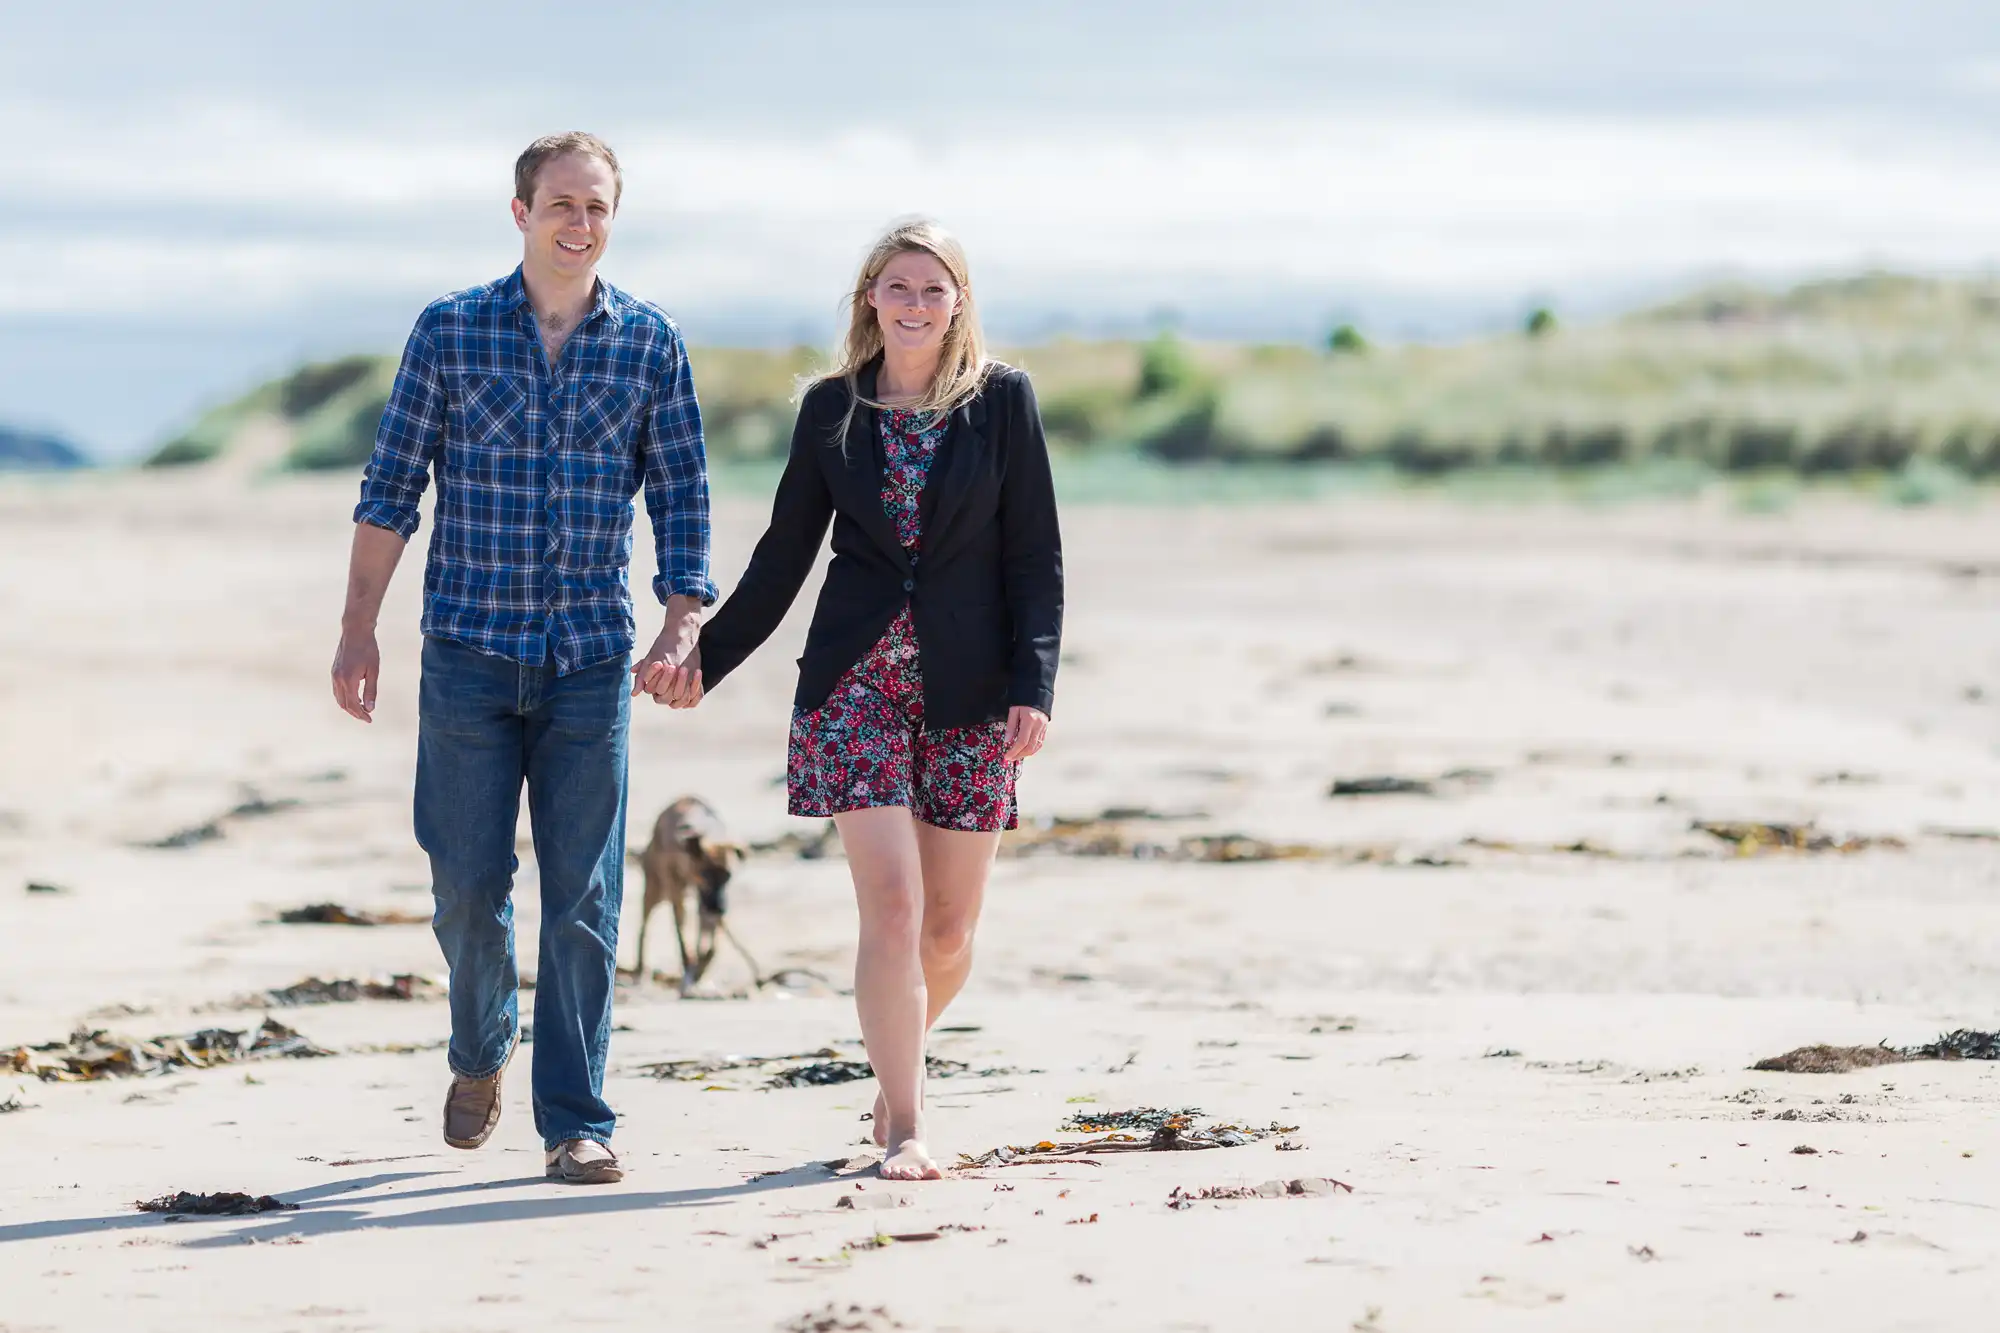 A couple walks hand-in-hand along a sandy beach with a small dog trailing behind, both smiling and casually dressed.